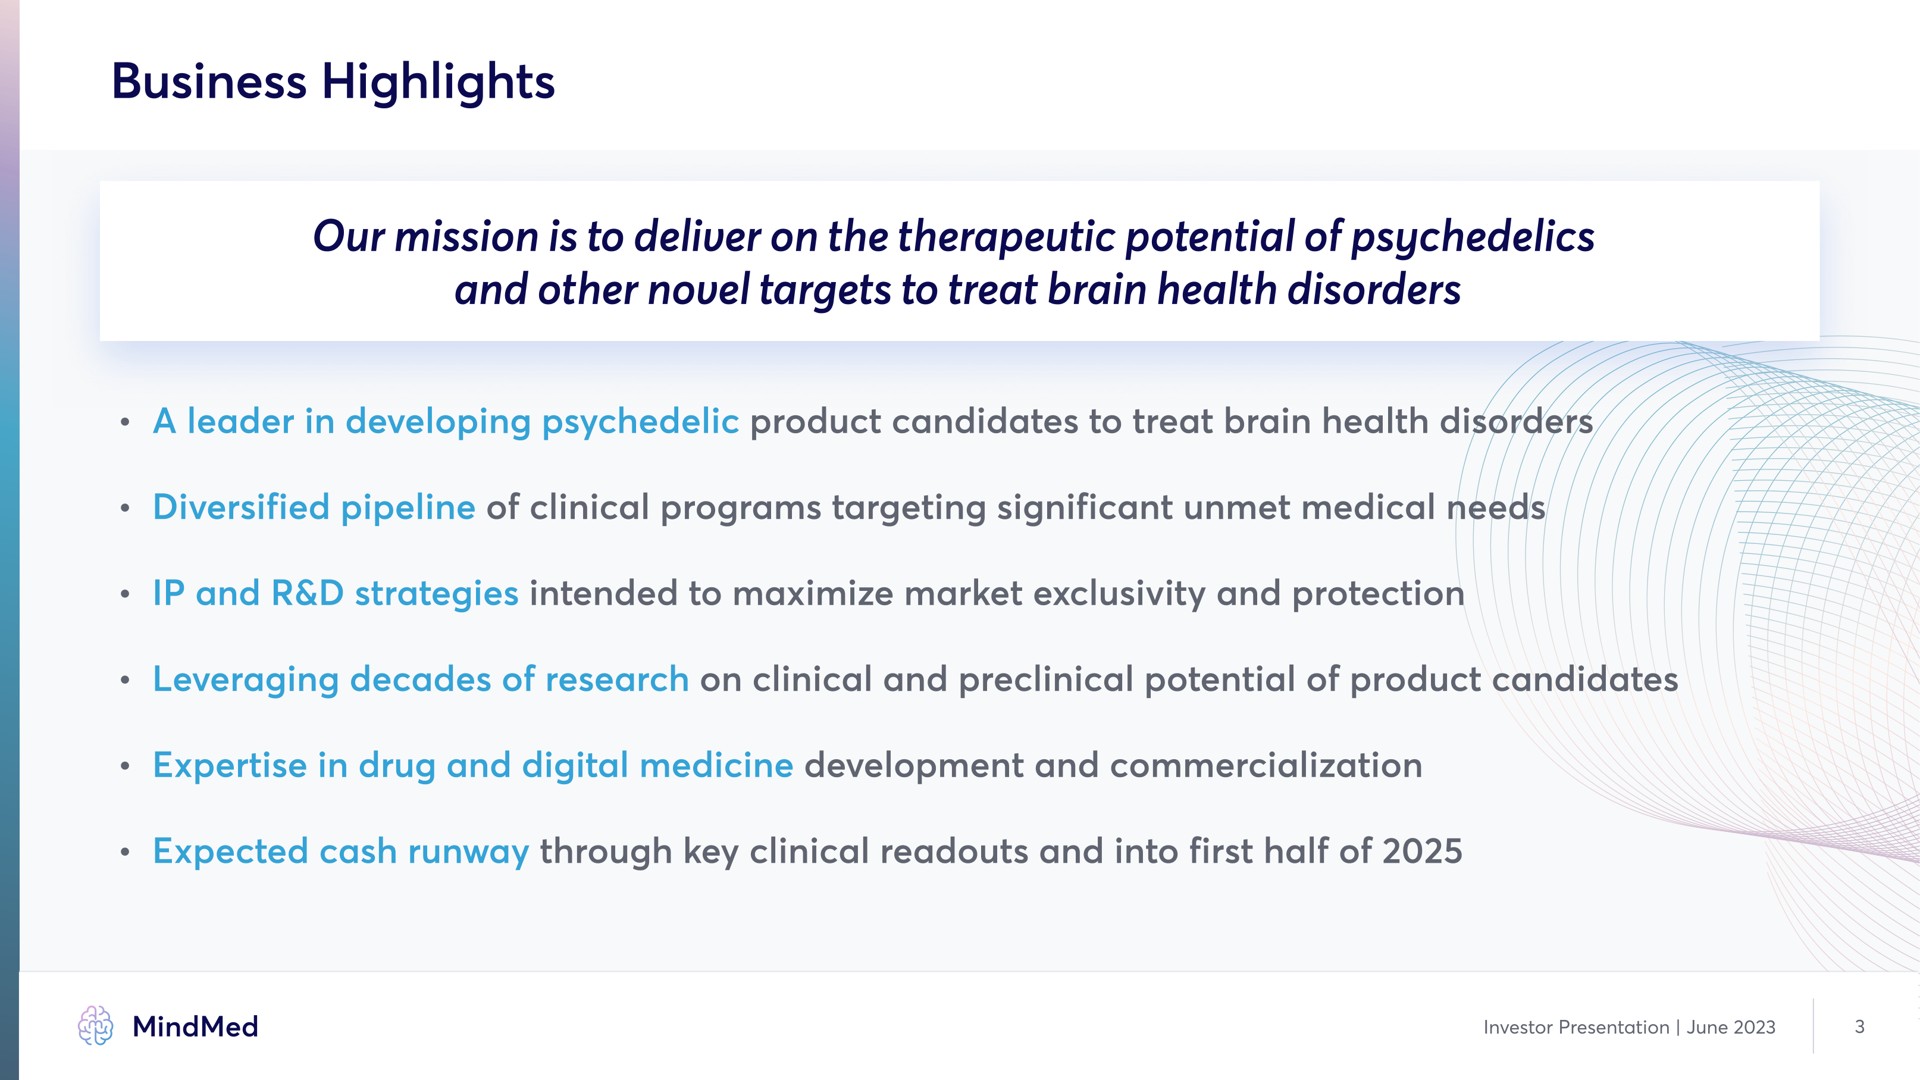 business highlights our mission is to deliver on the therapeutic potential of and other novel targets to treat brain health disorders a leader in developing product candidates to treat brain health i diversified pipeline of clinical programs targeting significant unmet medical needs and strategies intended to maximize market exclusivity and protection leveraging decades of research on clinical and preclinical potential of product candidates in drug and digital medicine development and commercialization expected cash runway through key clinical and into first half of | MindMed